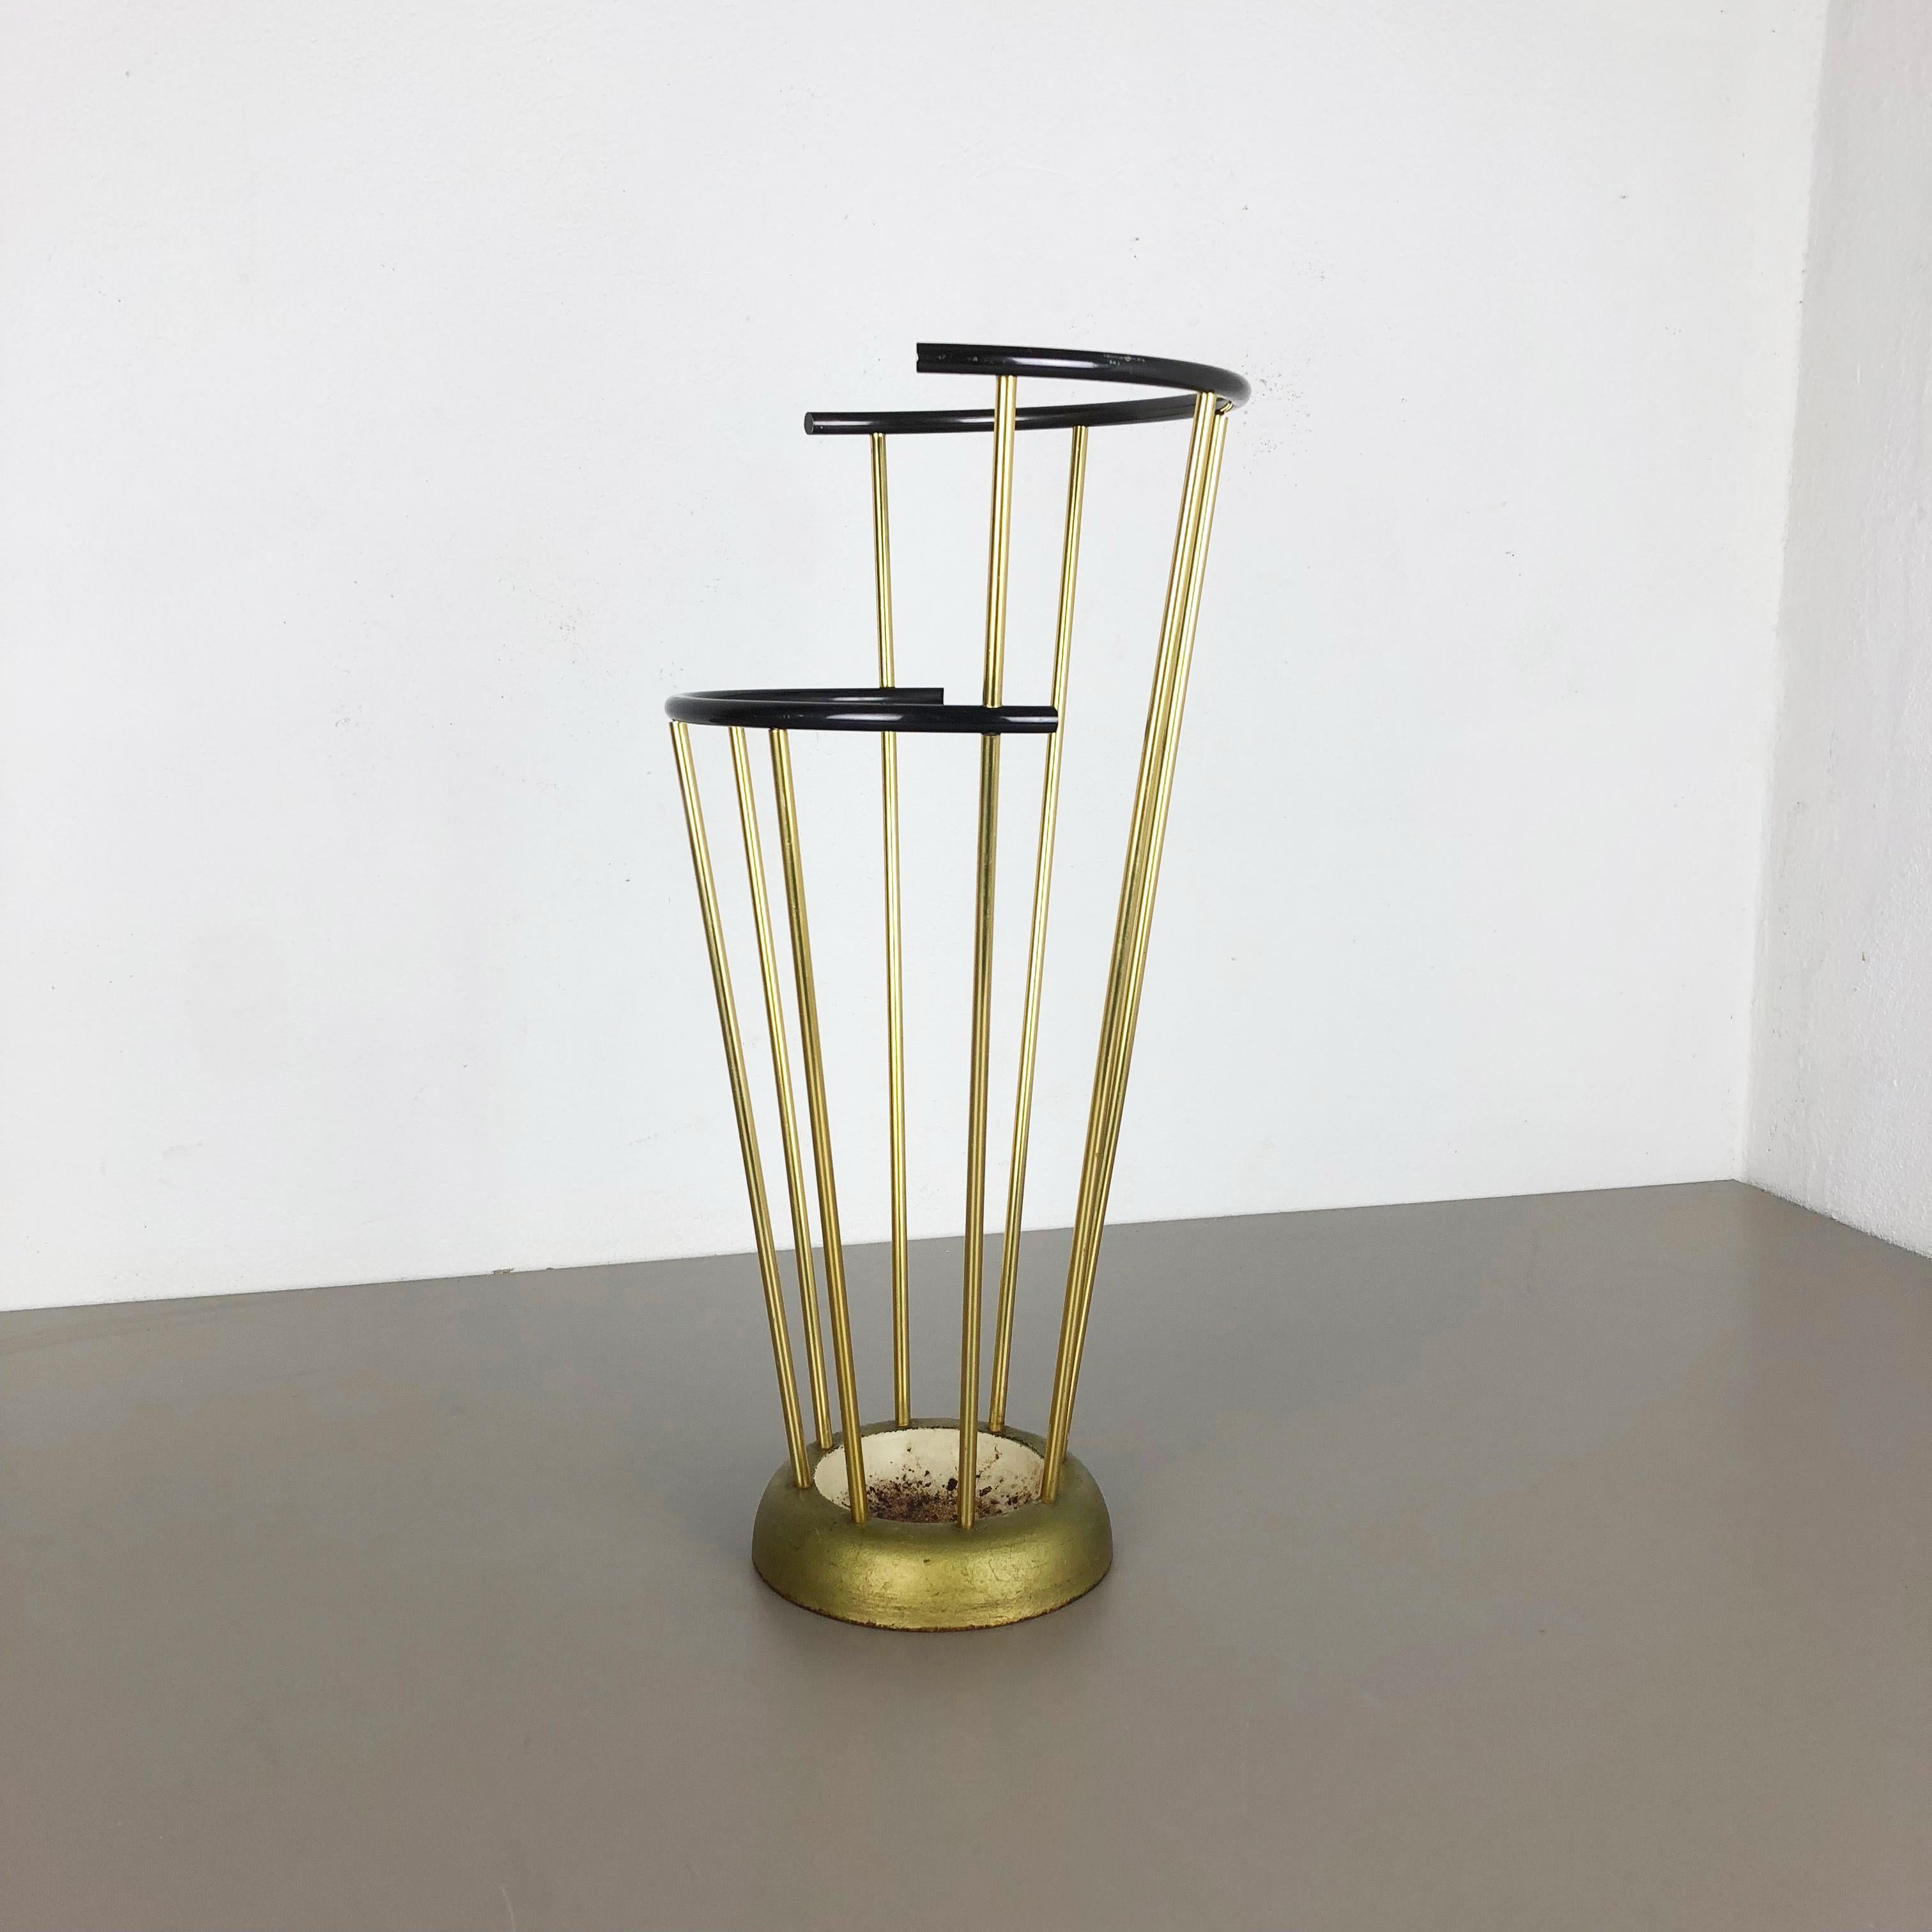 Bauhaus Midcentury Metal Brass Hollywood Regency Umbrella Stand by GECO, Germany, 1950s